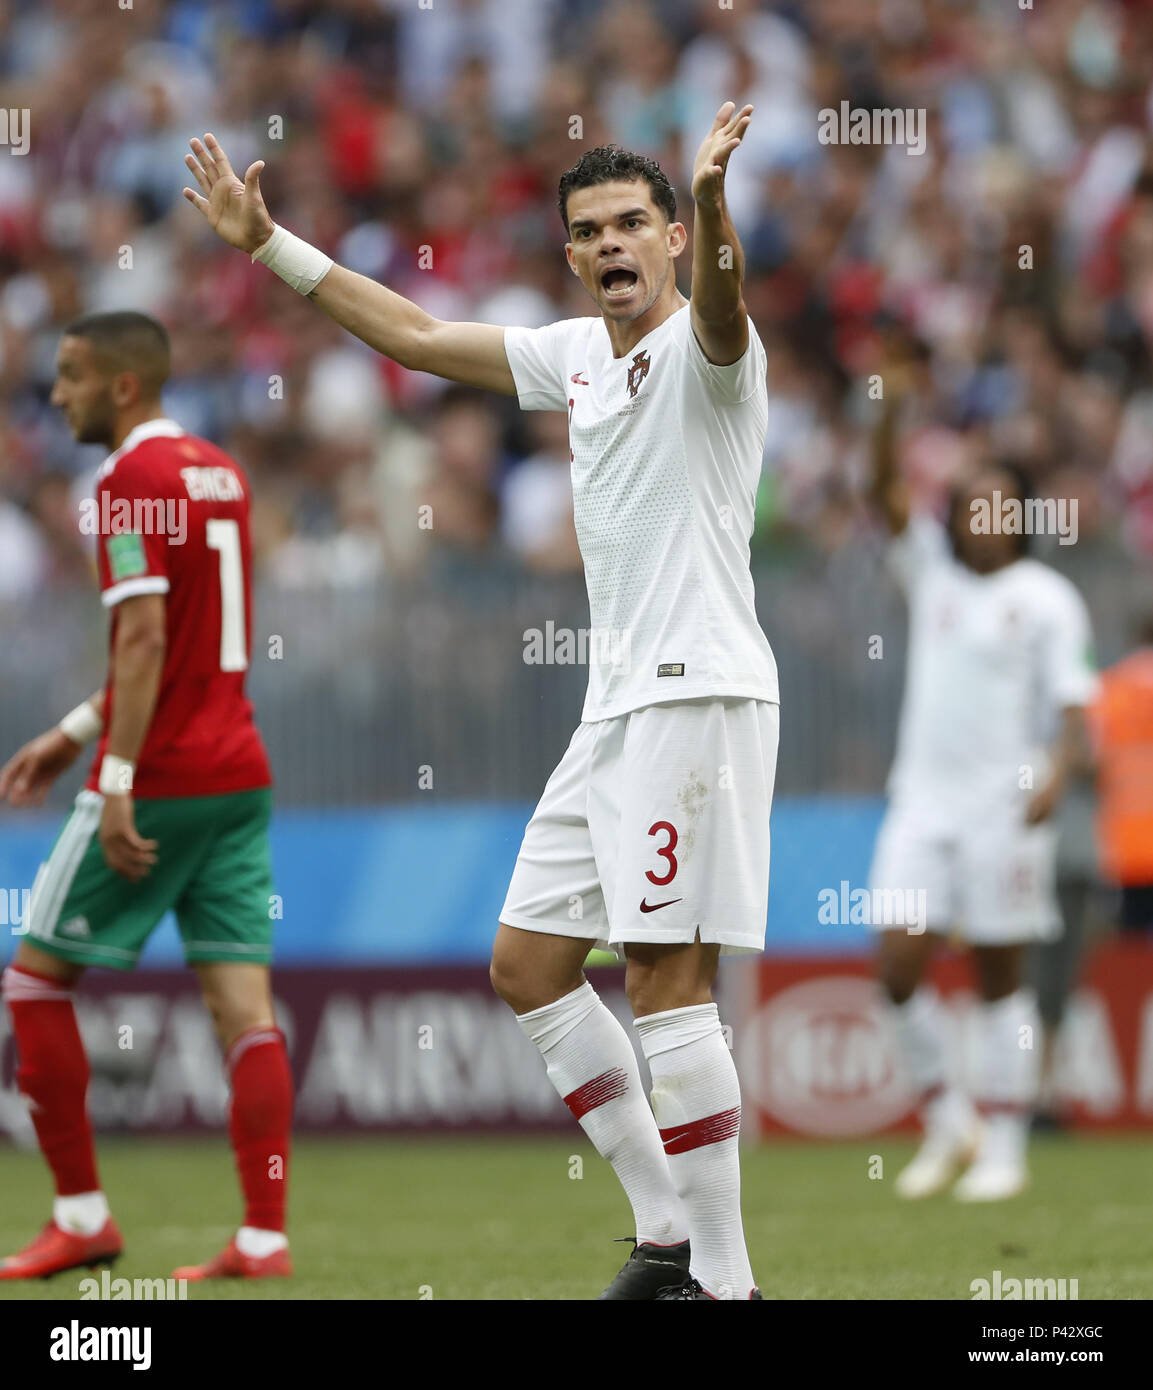 Moscow, Russia. 20th June, 2018. Pepe of Portugal reacts during a Group B match between Portugal and Morocco at the 2018 FIFA World Cup in Moscow, Russia, June 20, 2018. Credit: Cao Can/Xinhua/Alamy Live News Stock Photo